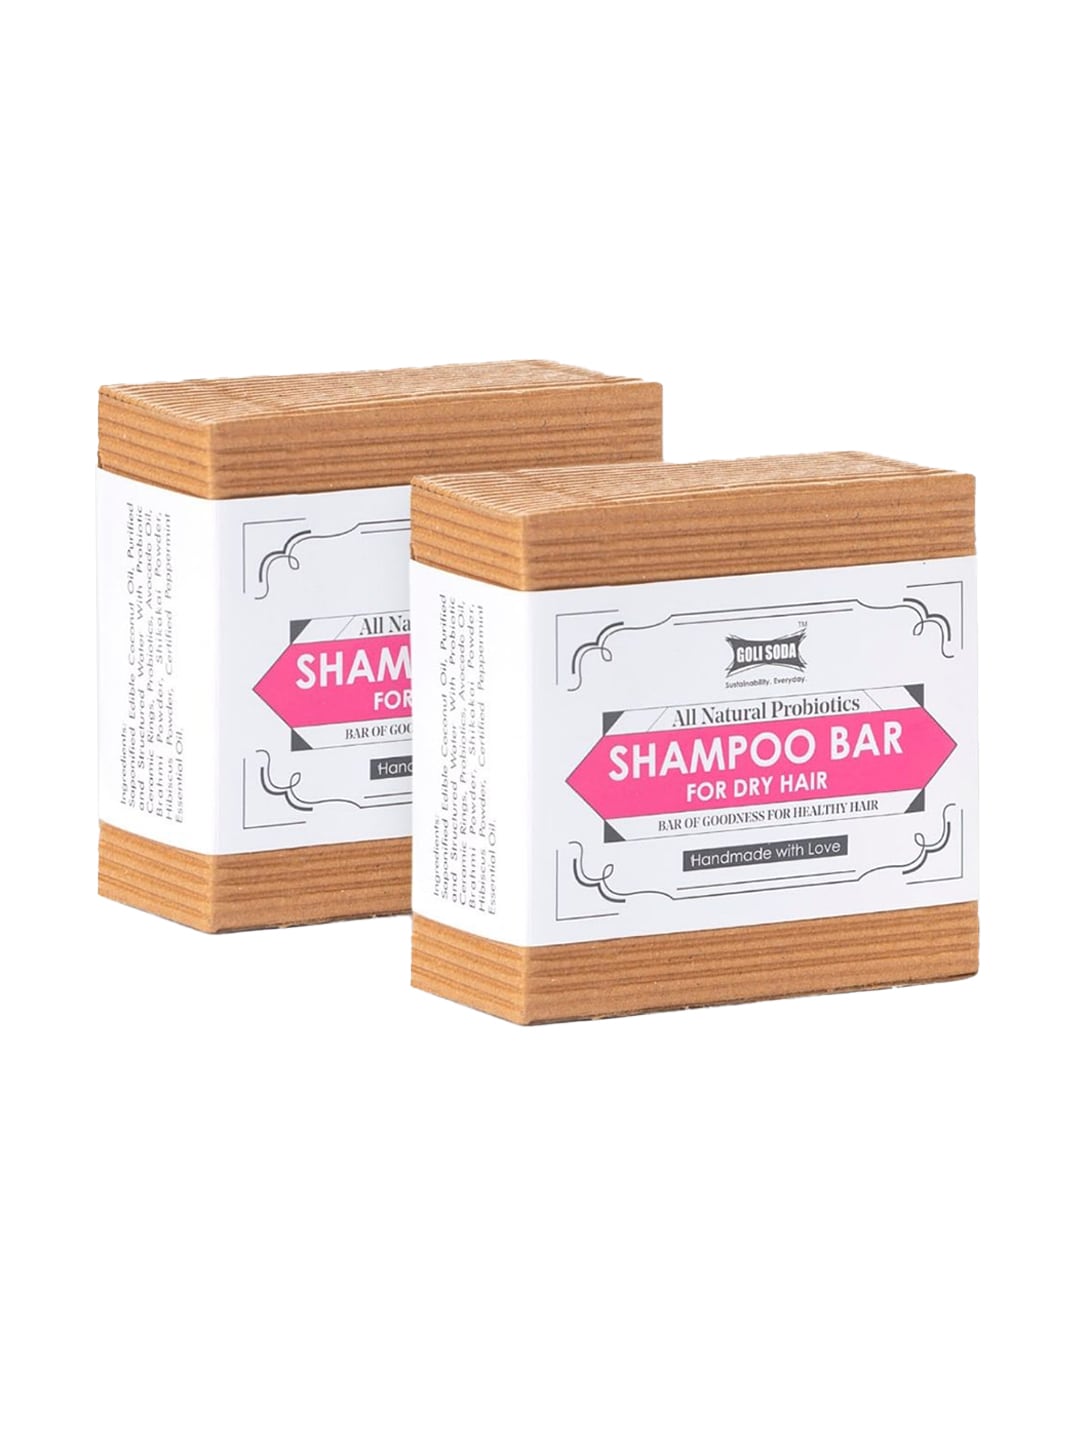 GOLI SODA Set of 2 All Natural Probiotics Shampoo Bars for Dry Hair - 90 g Each Price in India